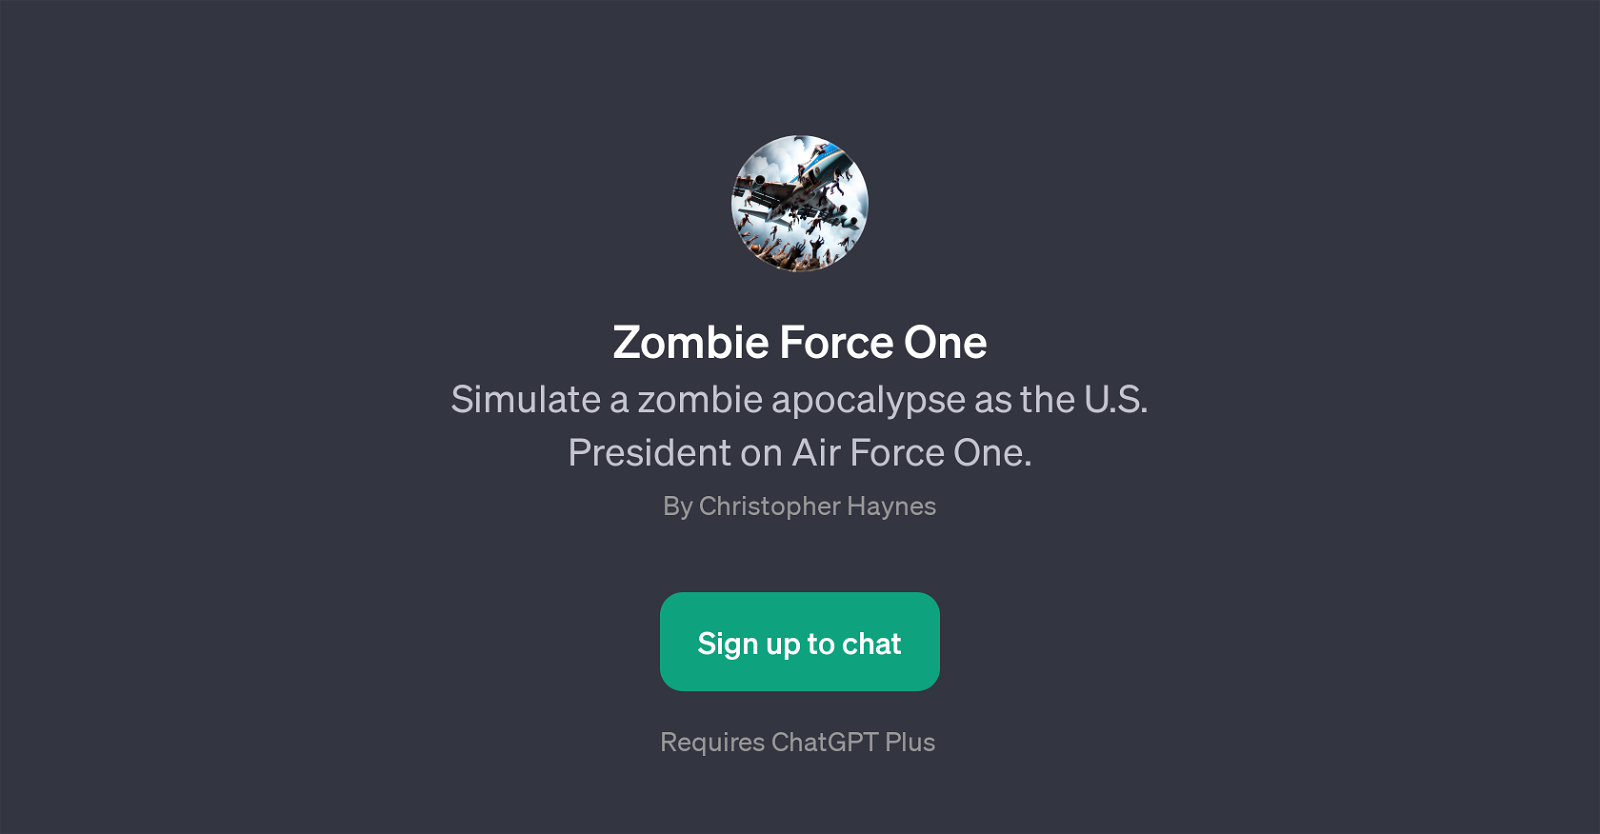 Zombie Force One website